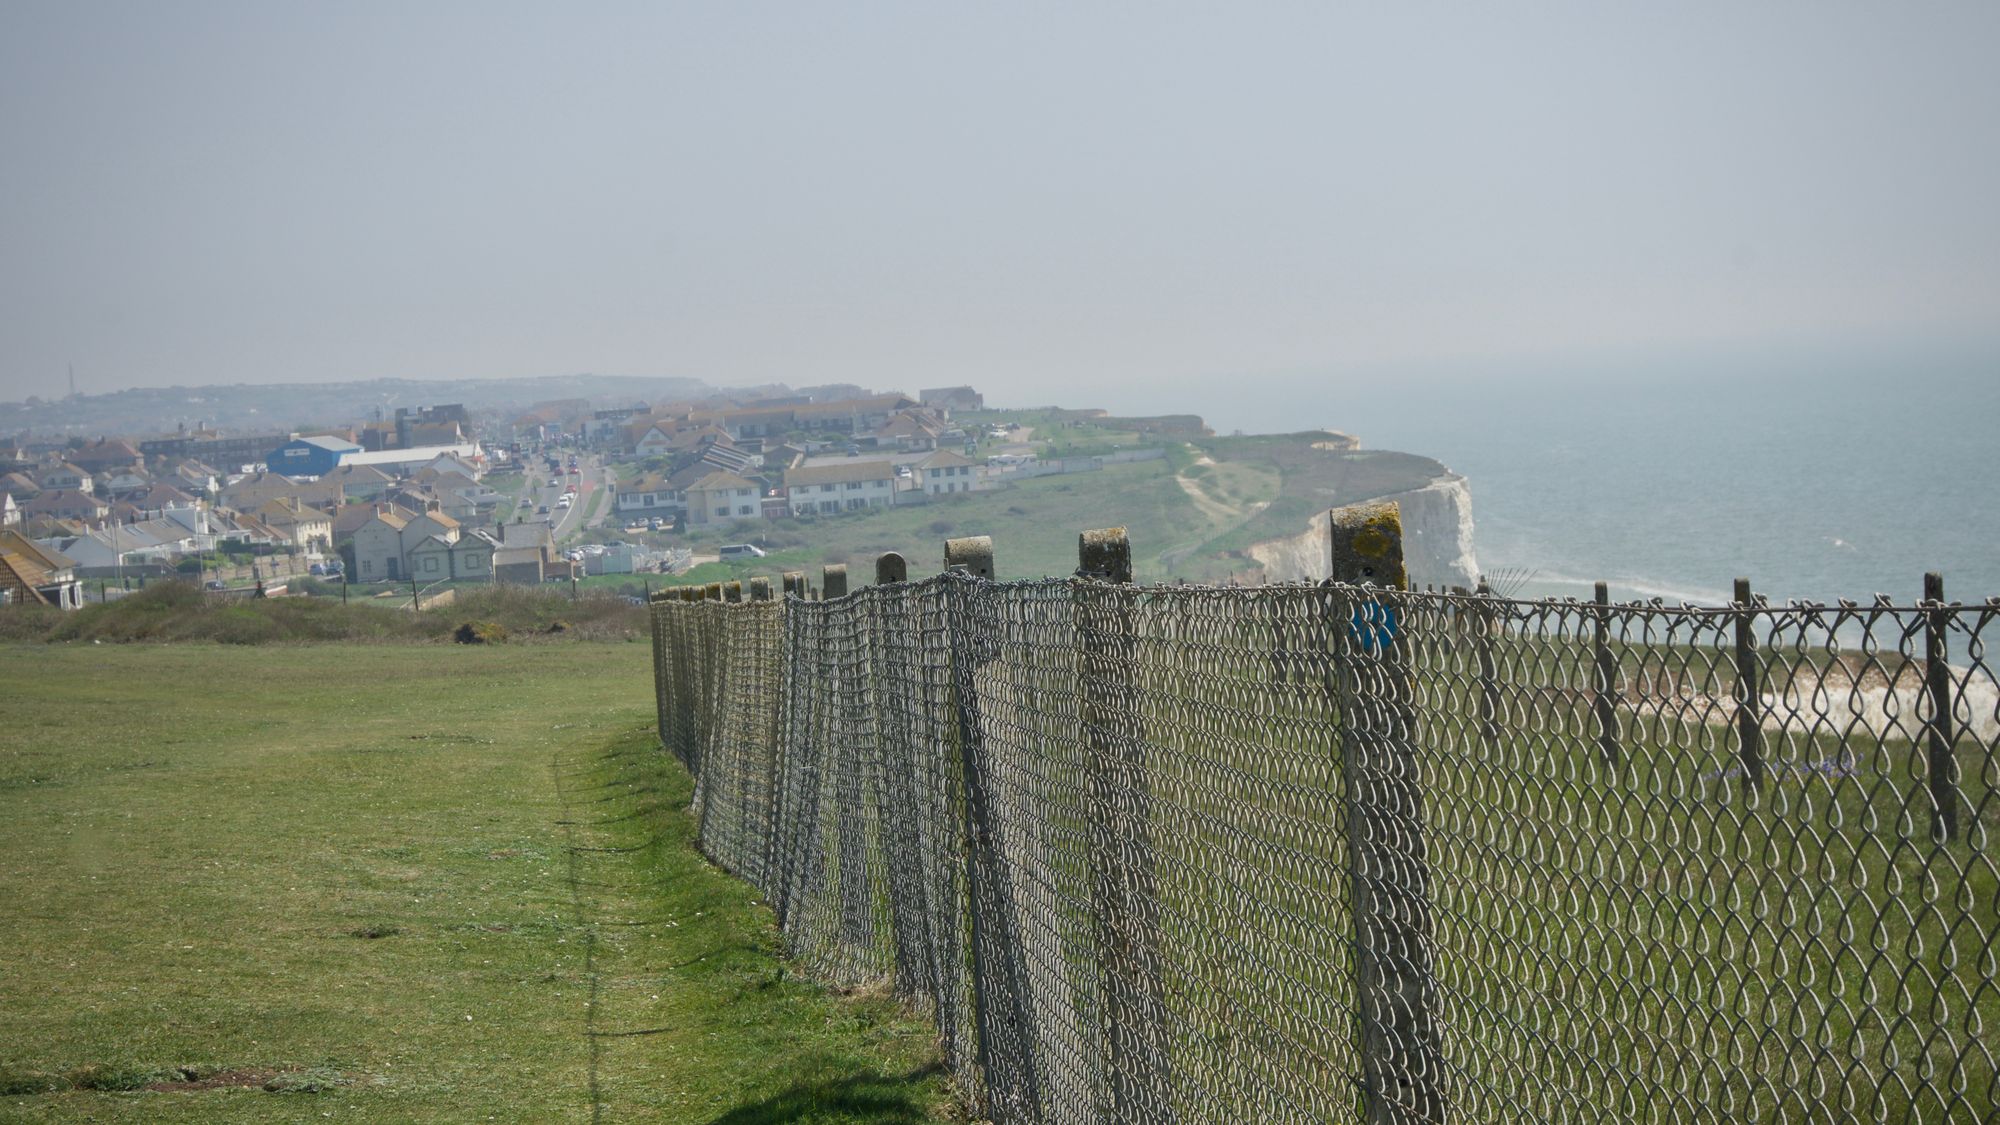 A cliff-edge with wire fencing looking east towards a town